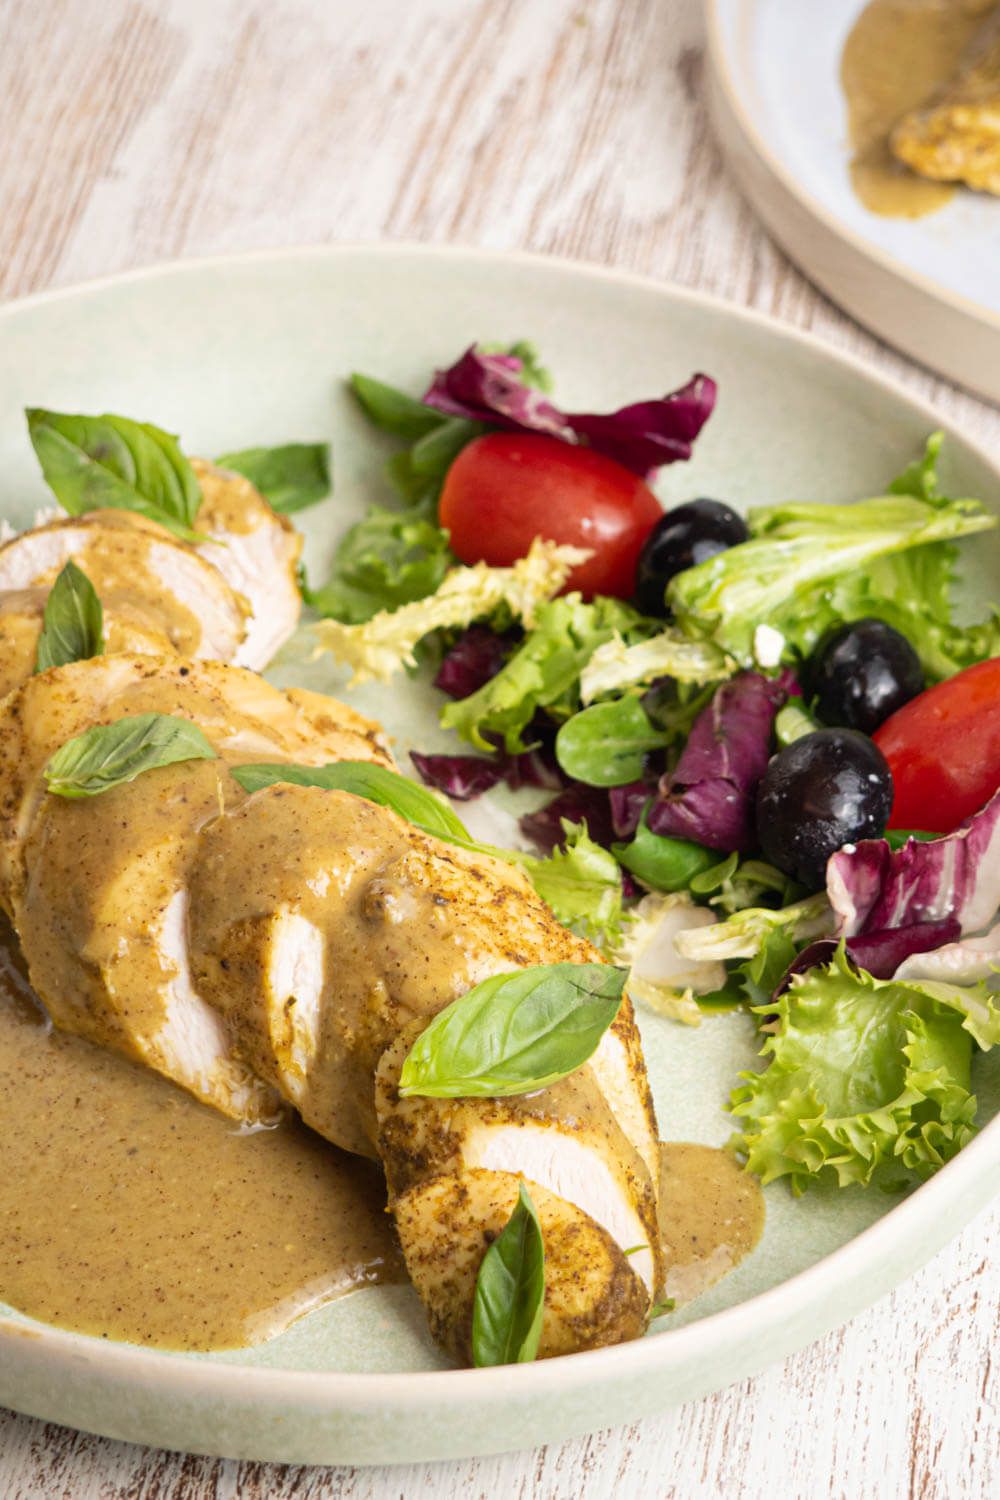 Crockpot coconut basil chicken breast cut into slices on a plate with a green salad.